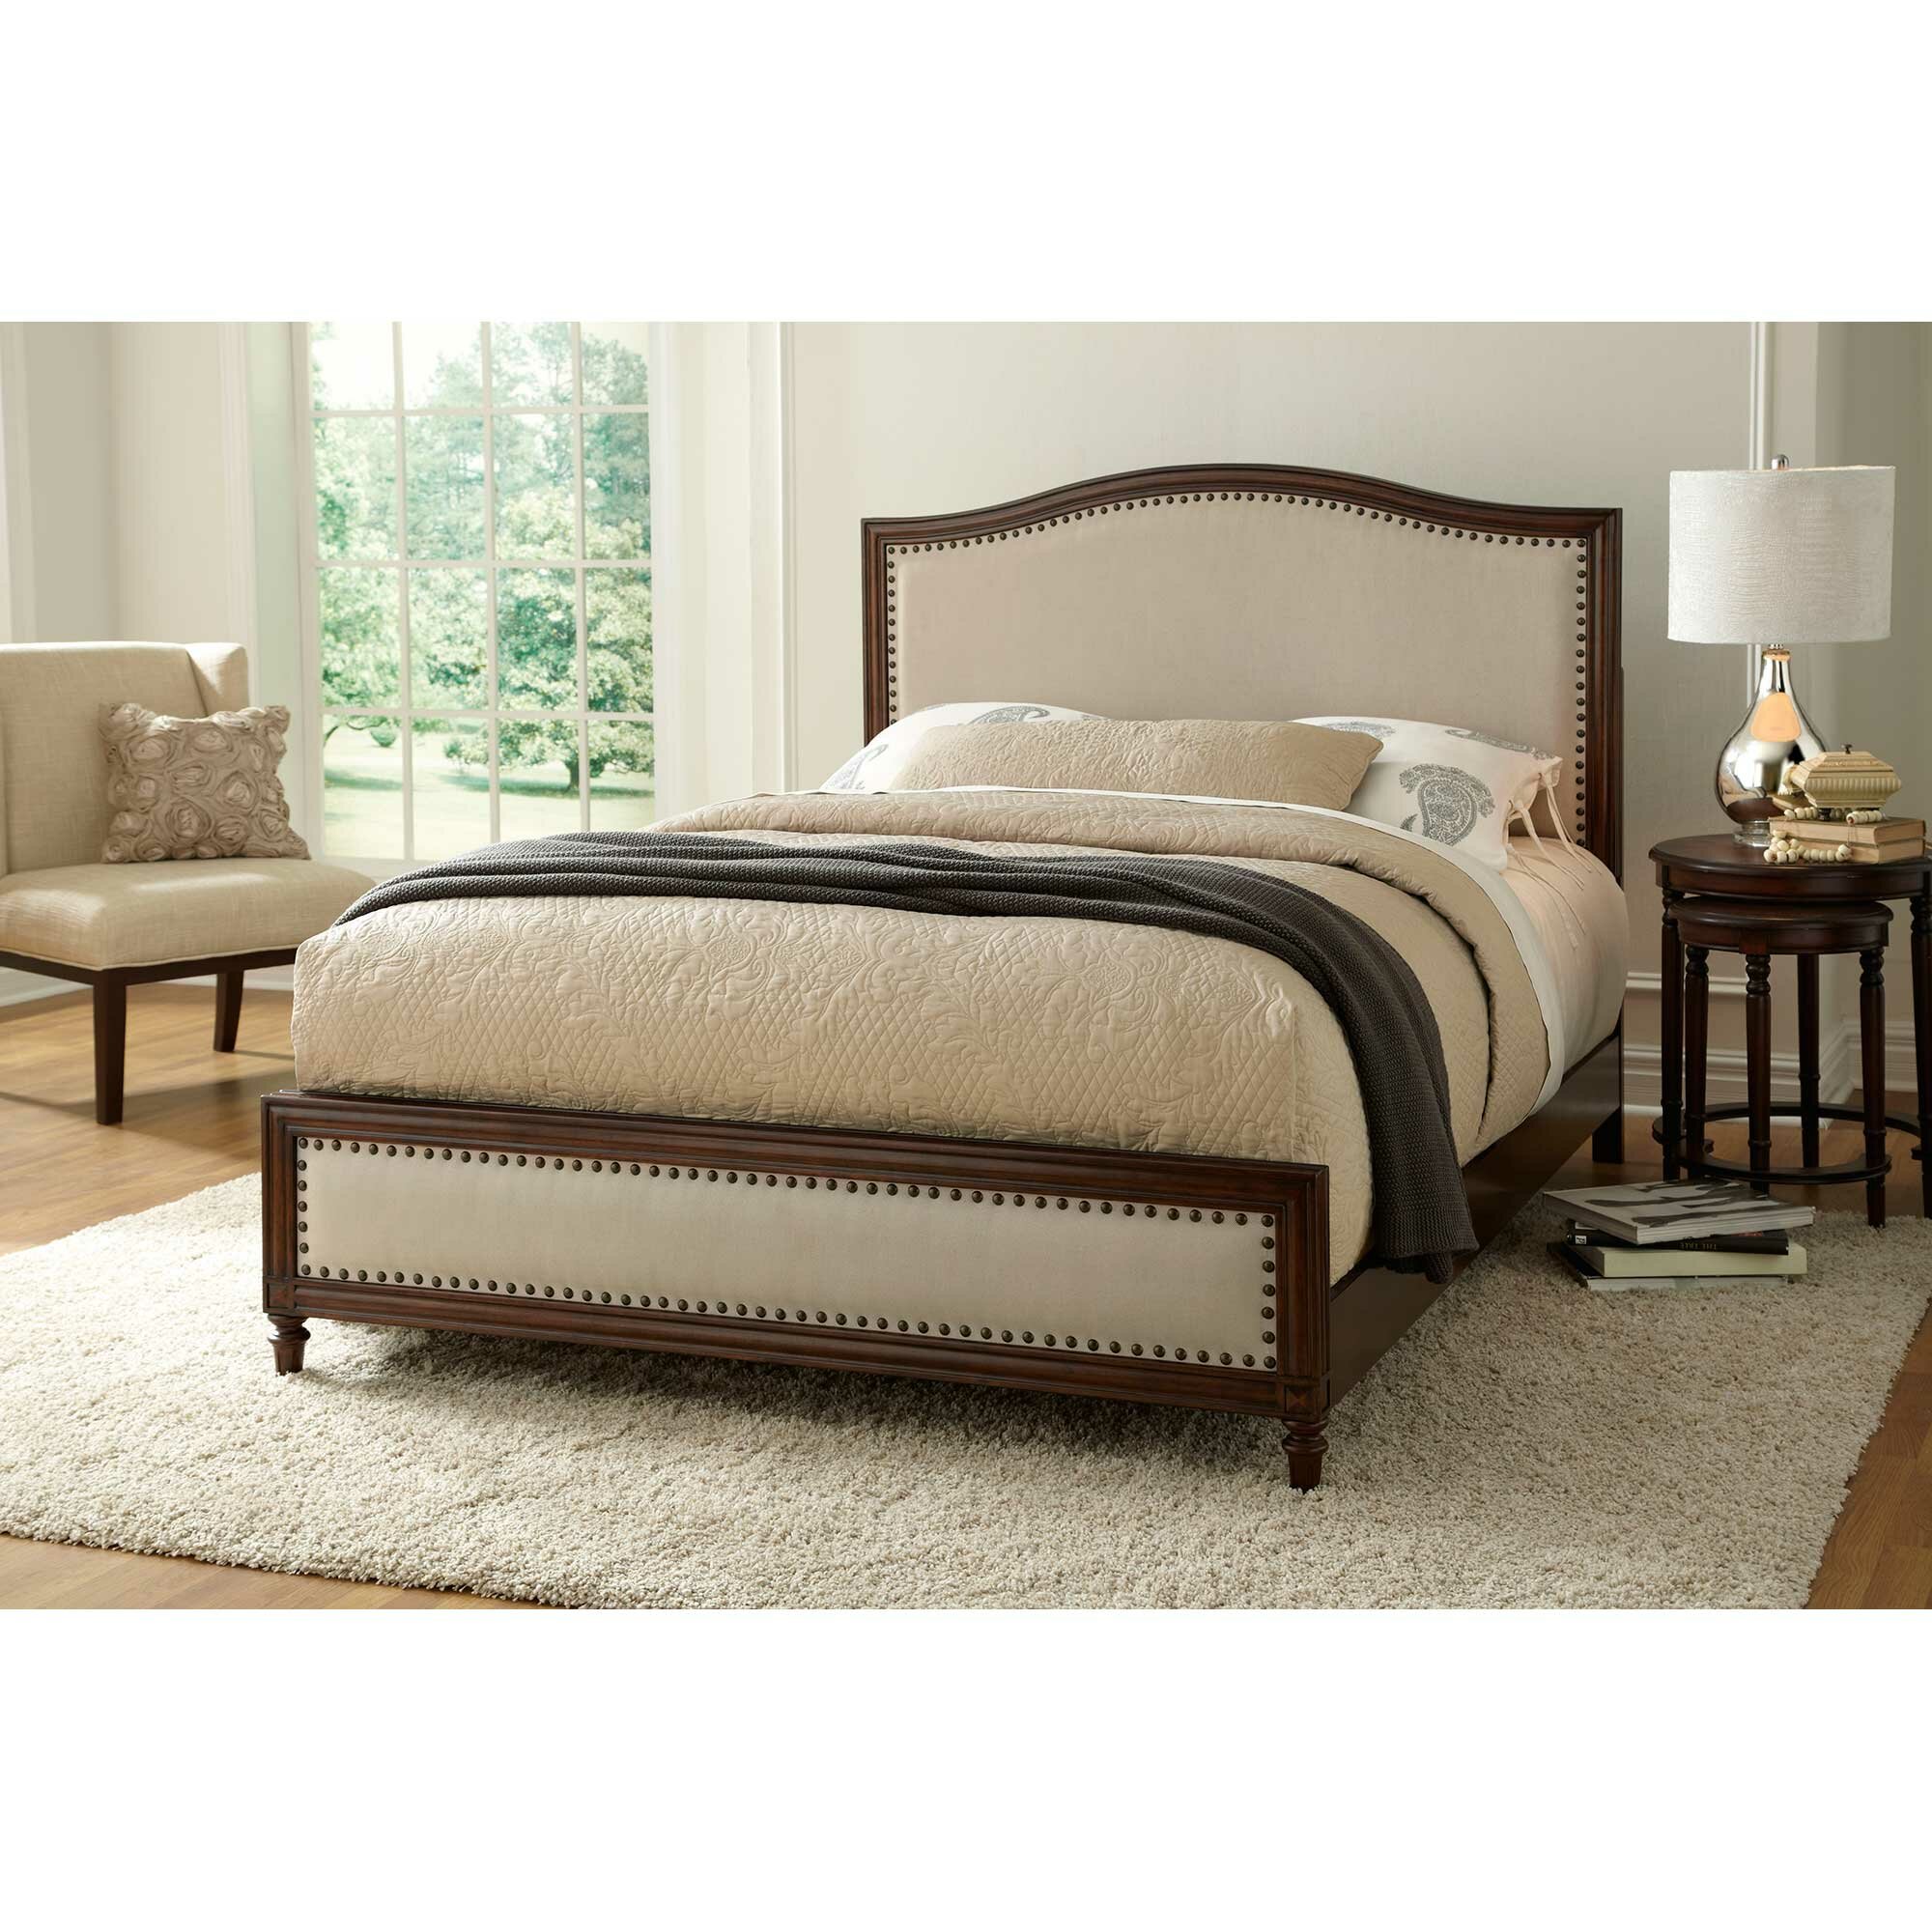 Fashion Bed Group Beds 107